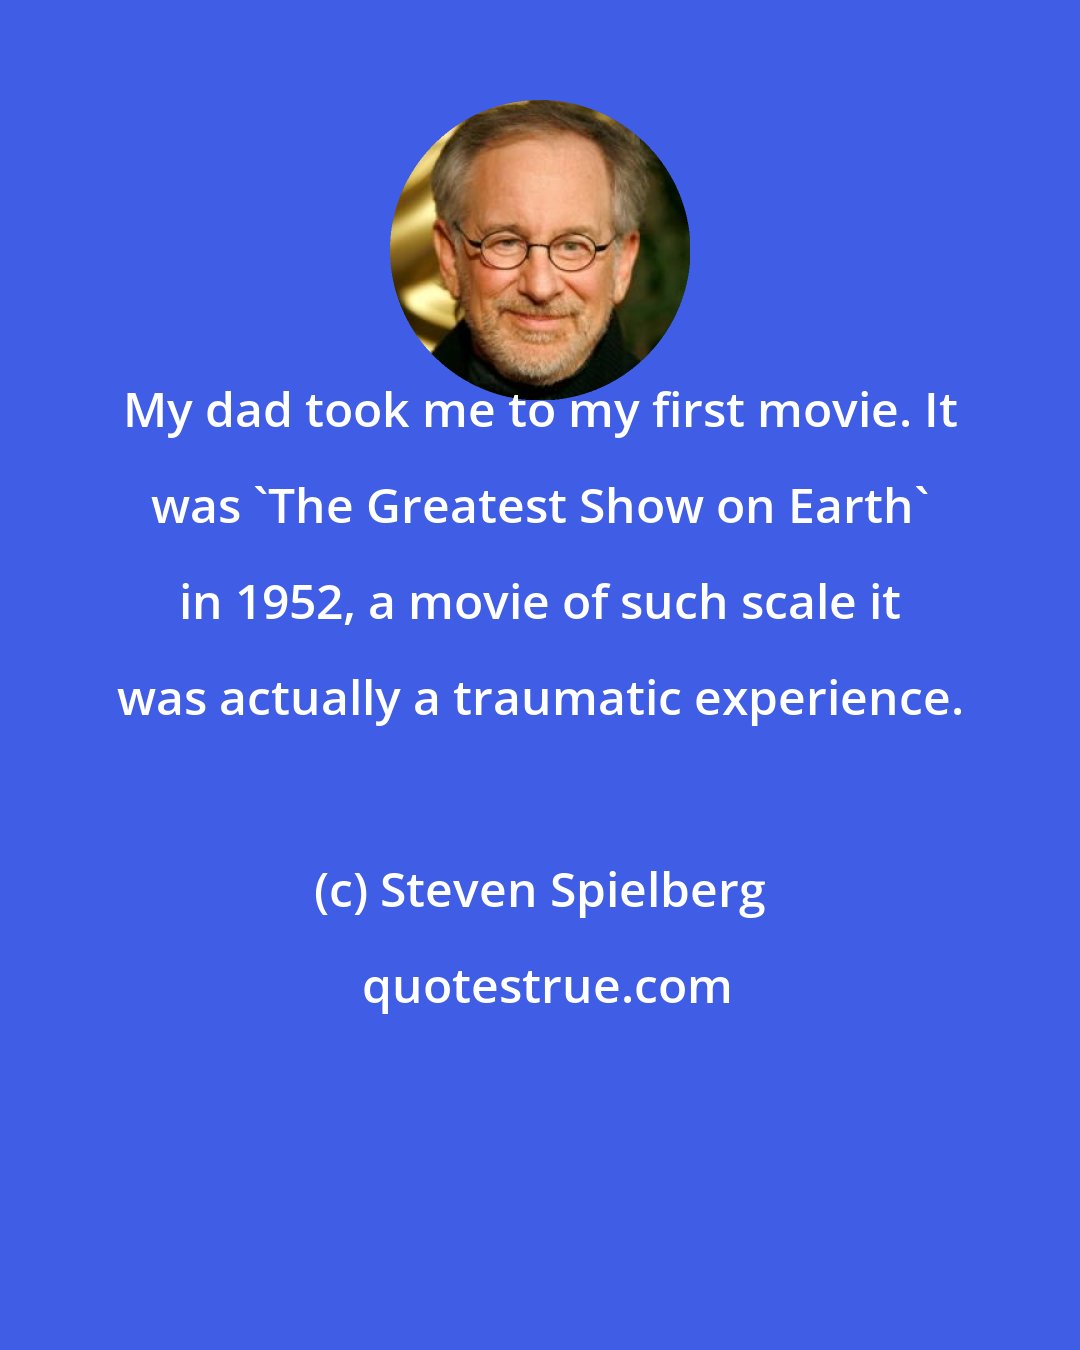 Steven Spielberg: My dad took me to my first movie. It was 'The Greatest Show on Earth' in 1952, a movie of such scale it was actually a traumatic experience.